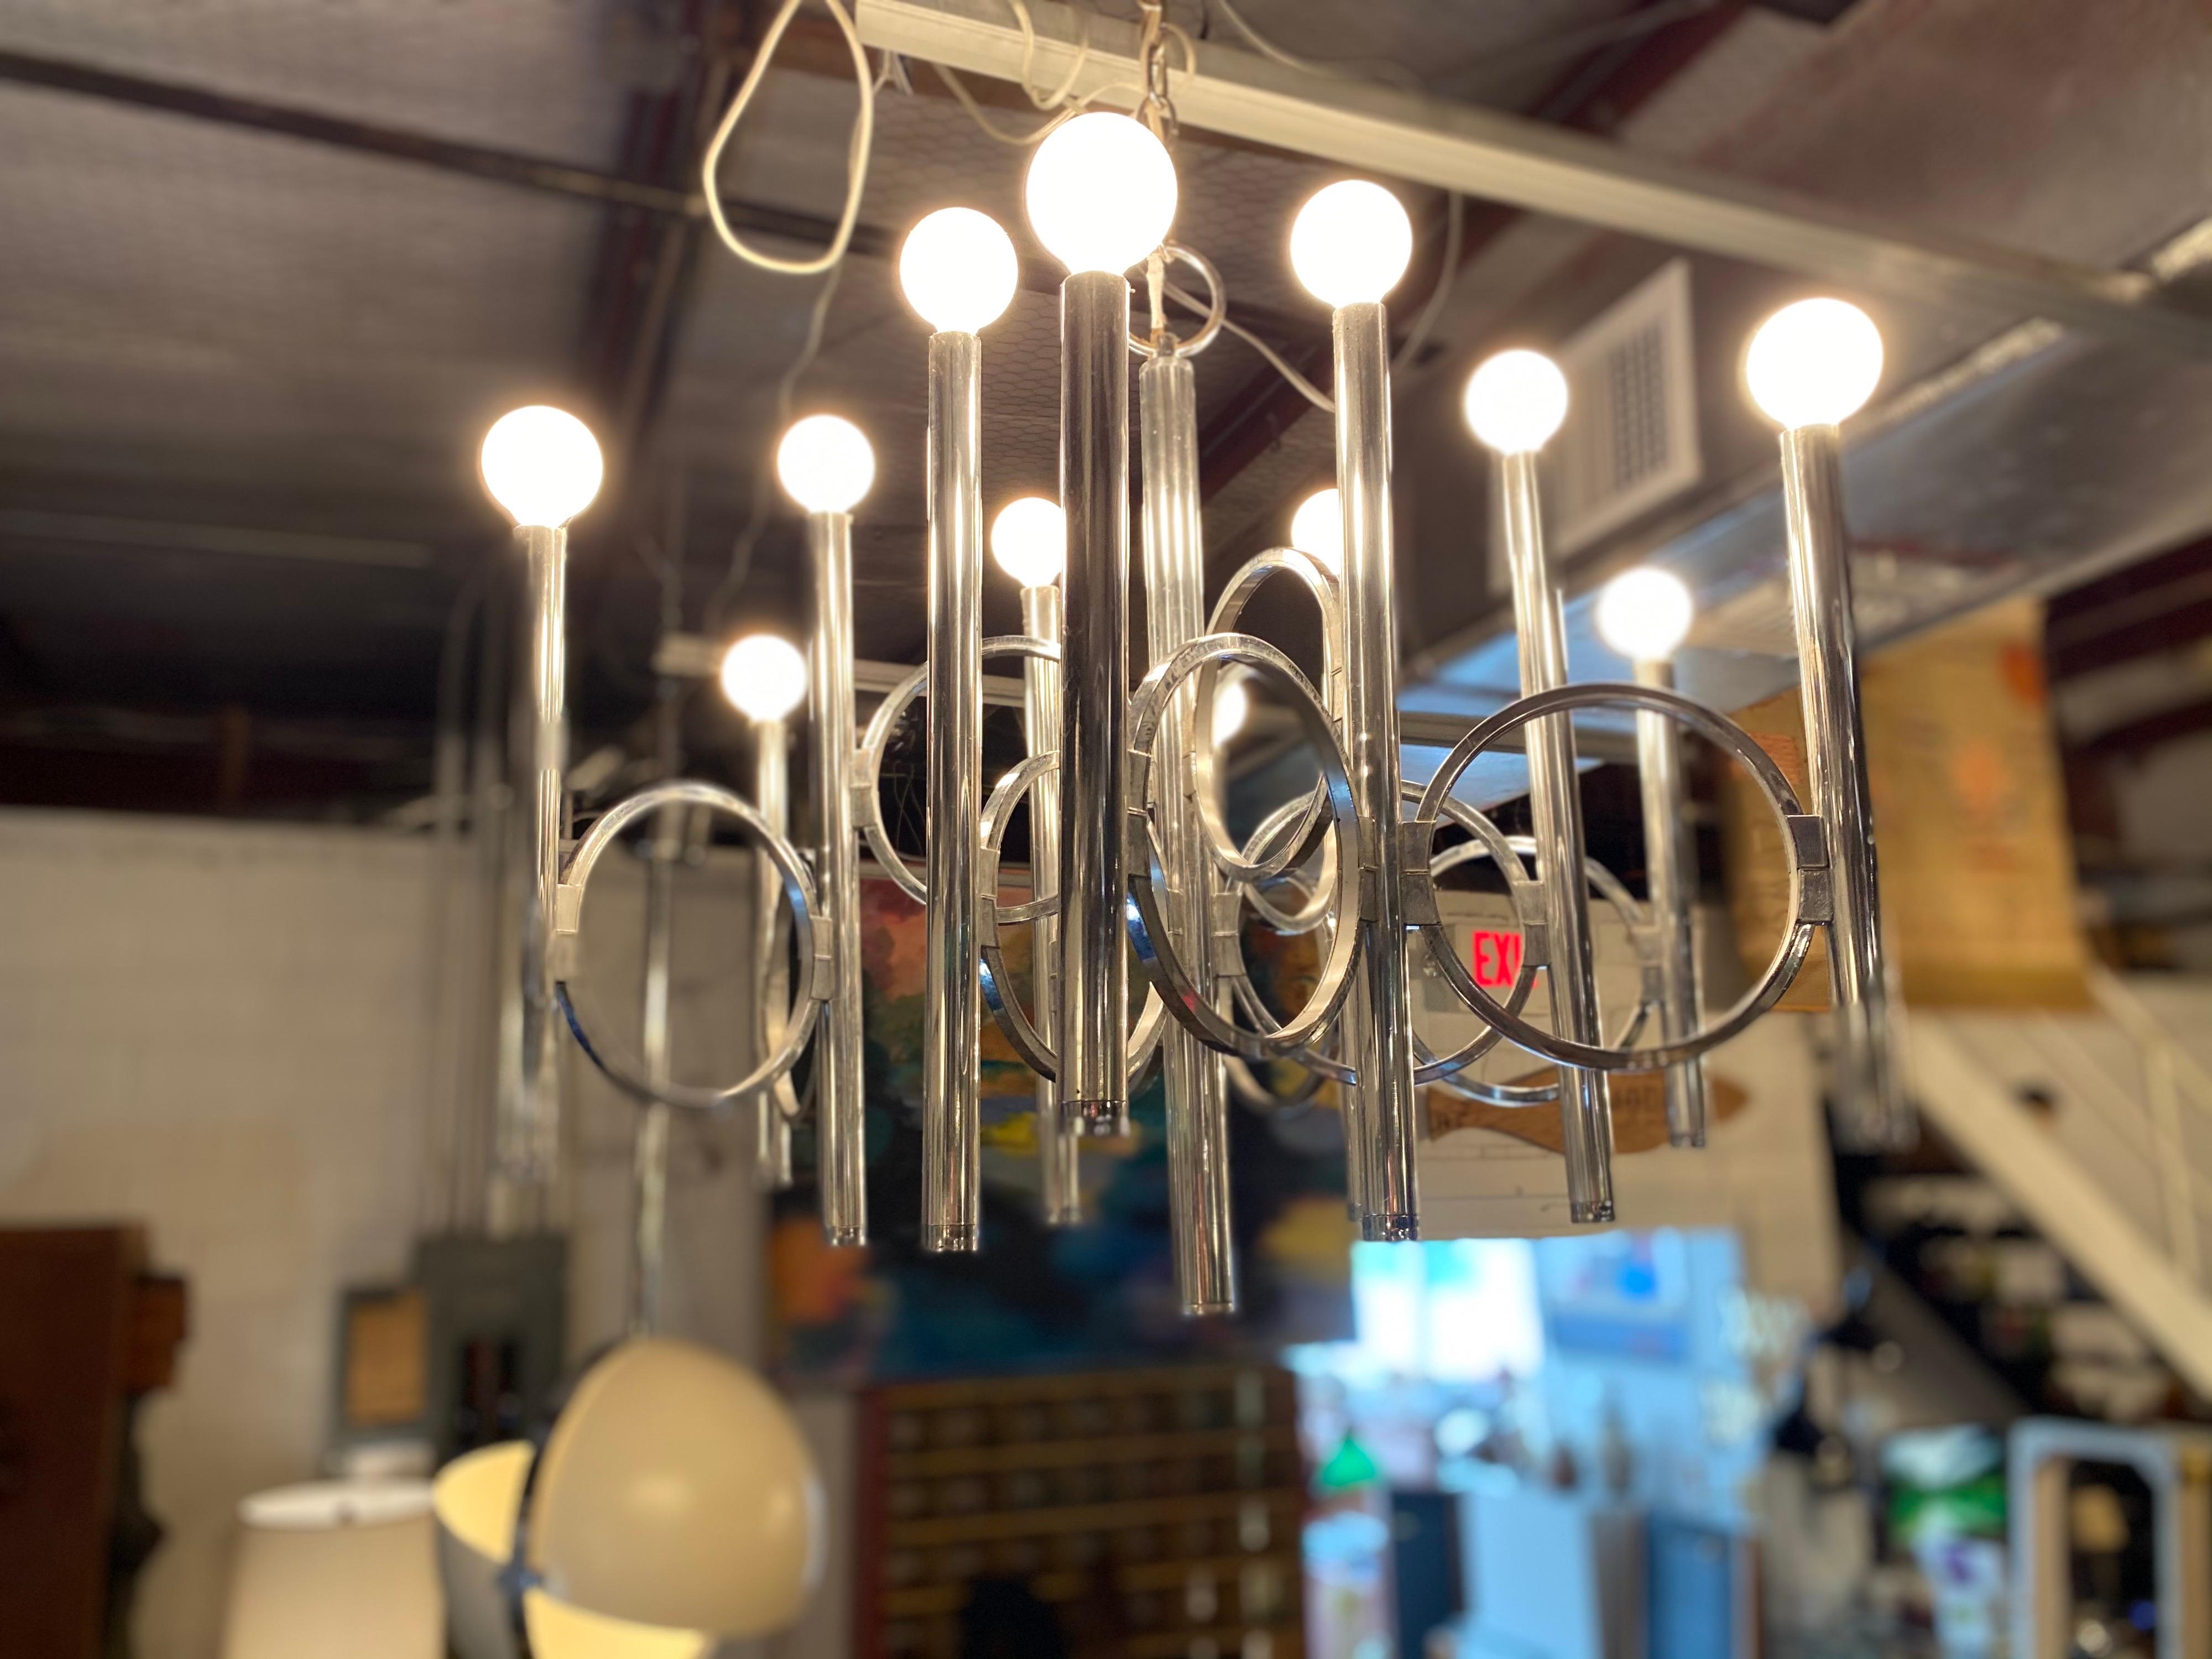 Chrome Mid-Century Modern Italian chandelier by Gaetano Sciolari for Lightolier, Hollywood Regency. Takes 12 bulbs and is in overall great condition.